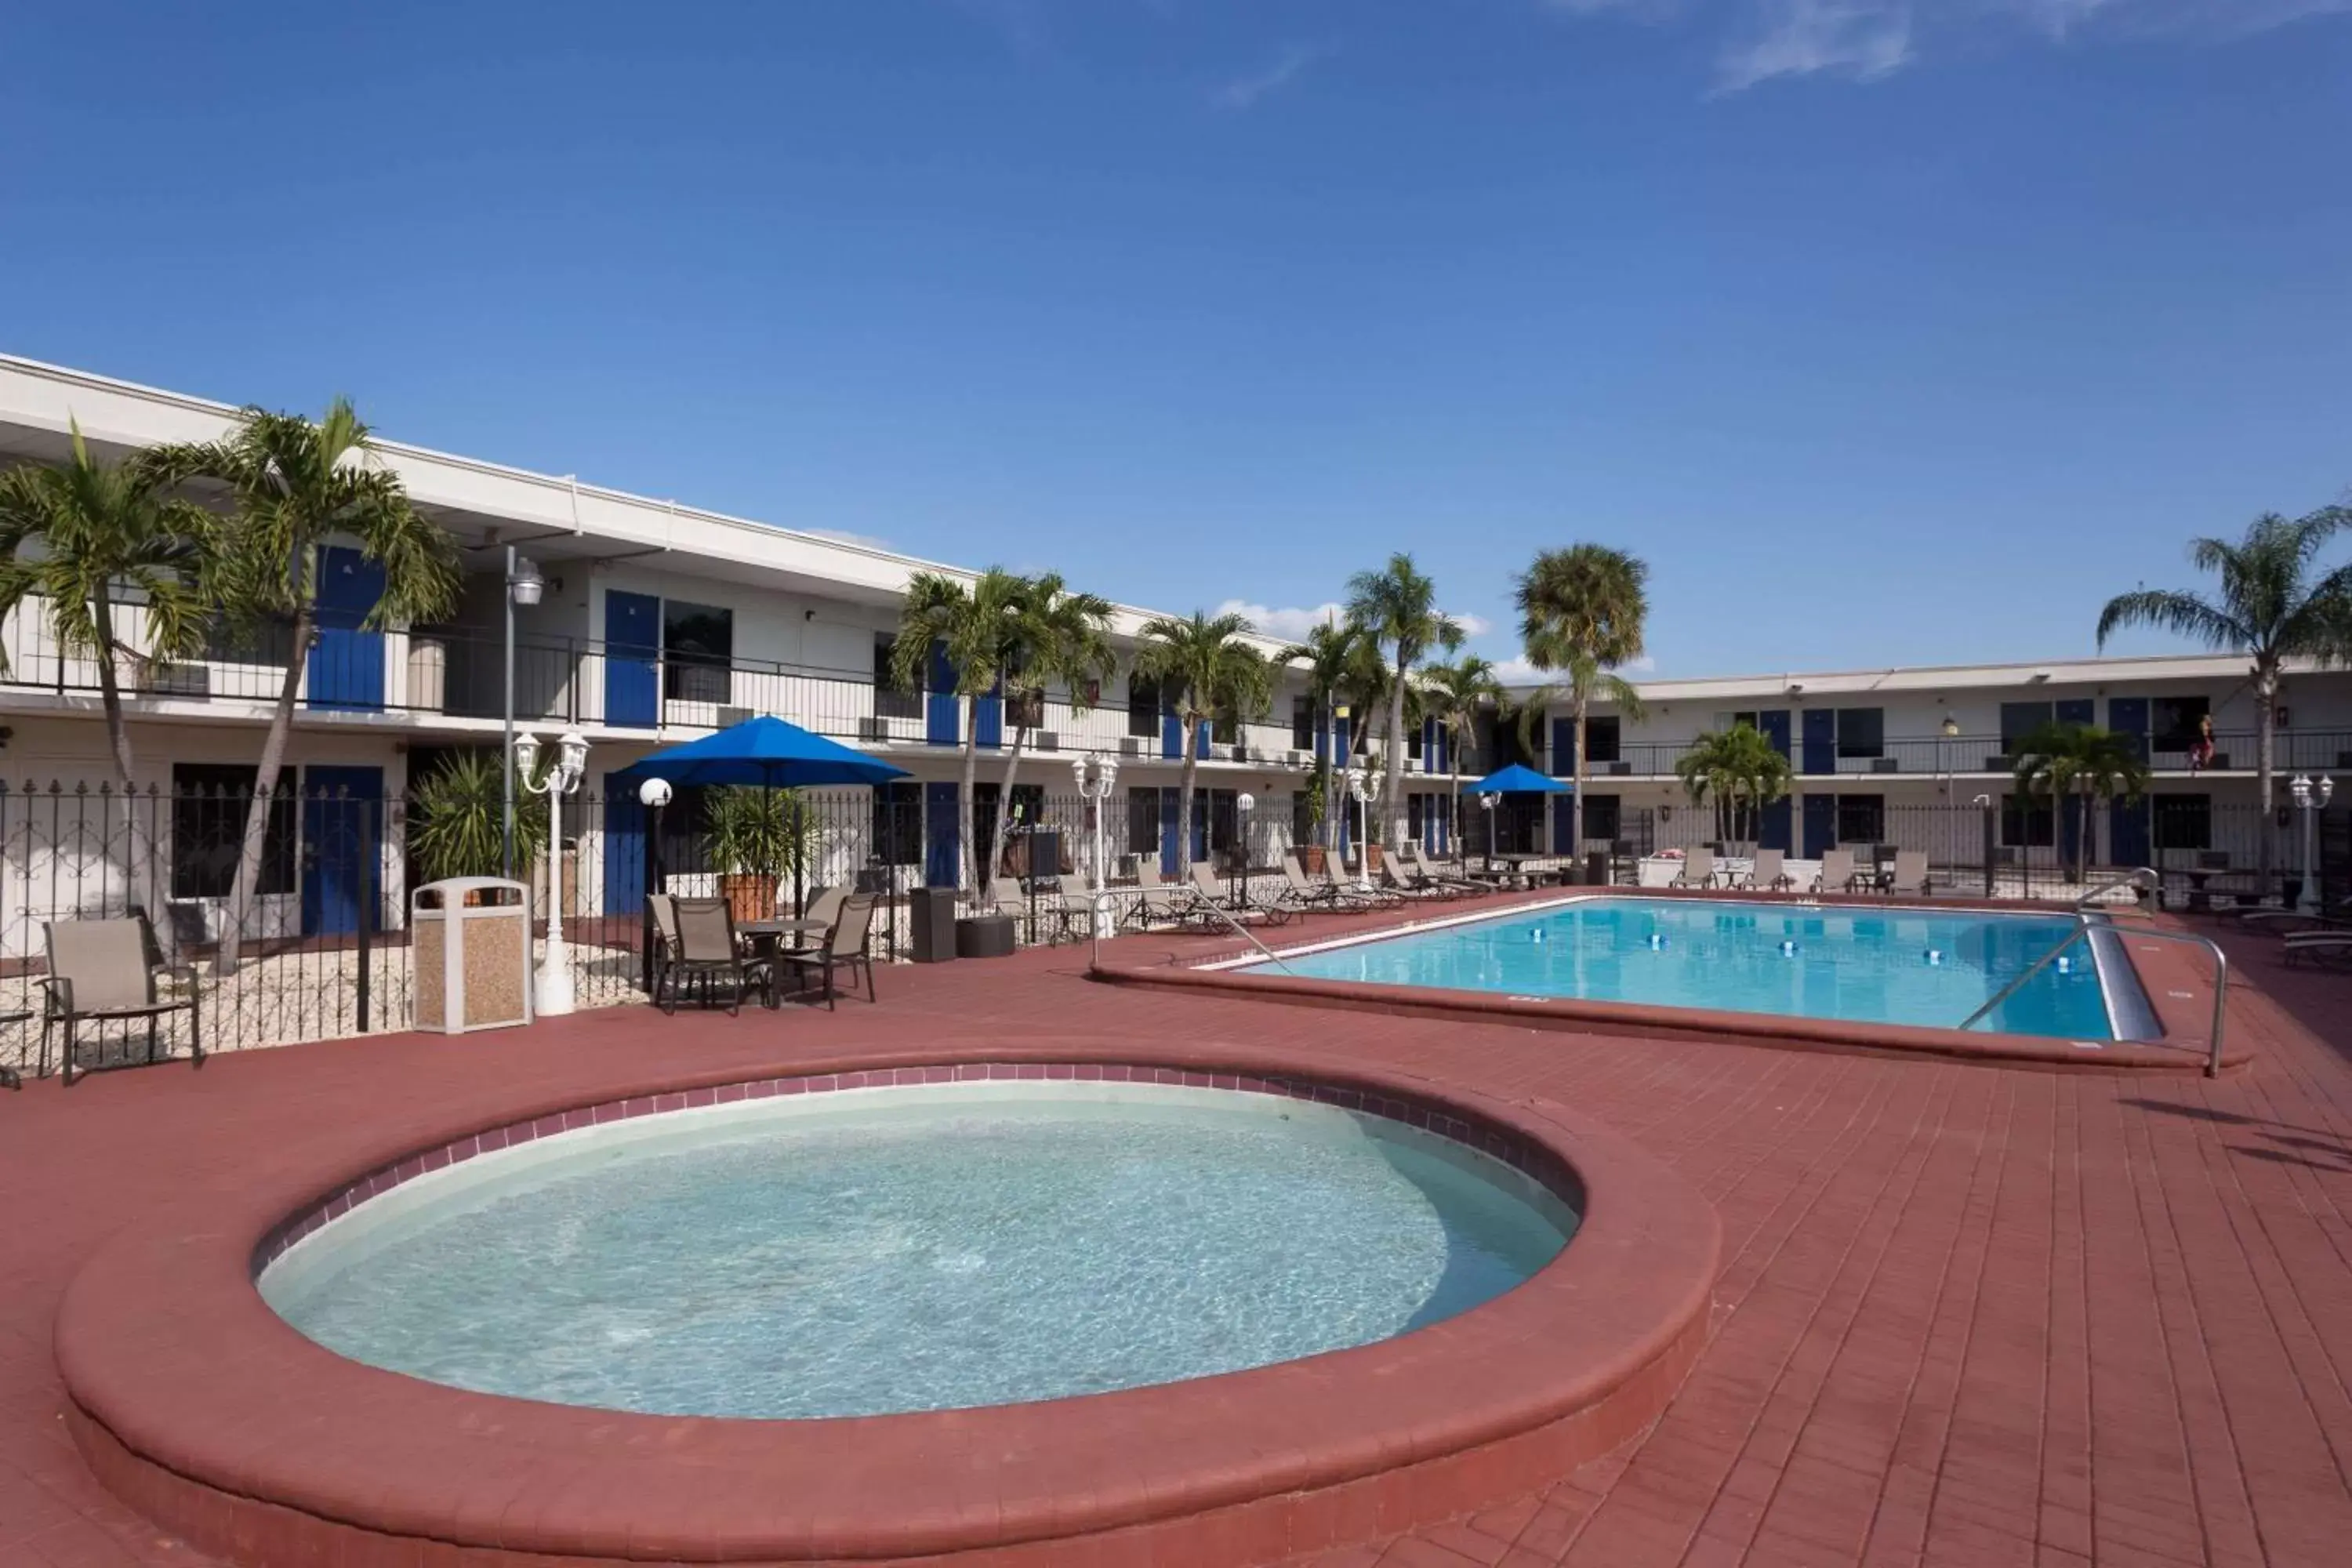 Hot Tub, Swimming Pool in Days Inn by Wyndham St. Petersburg / Tampa Bay Area